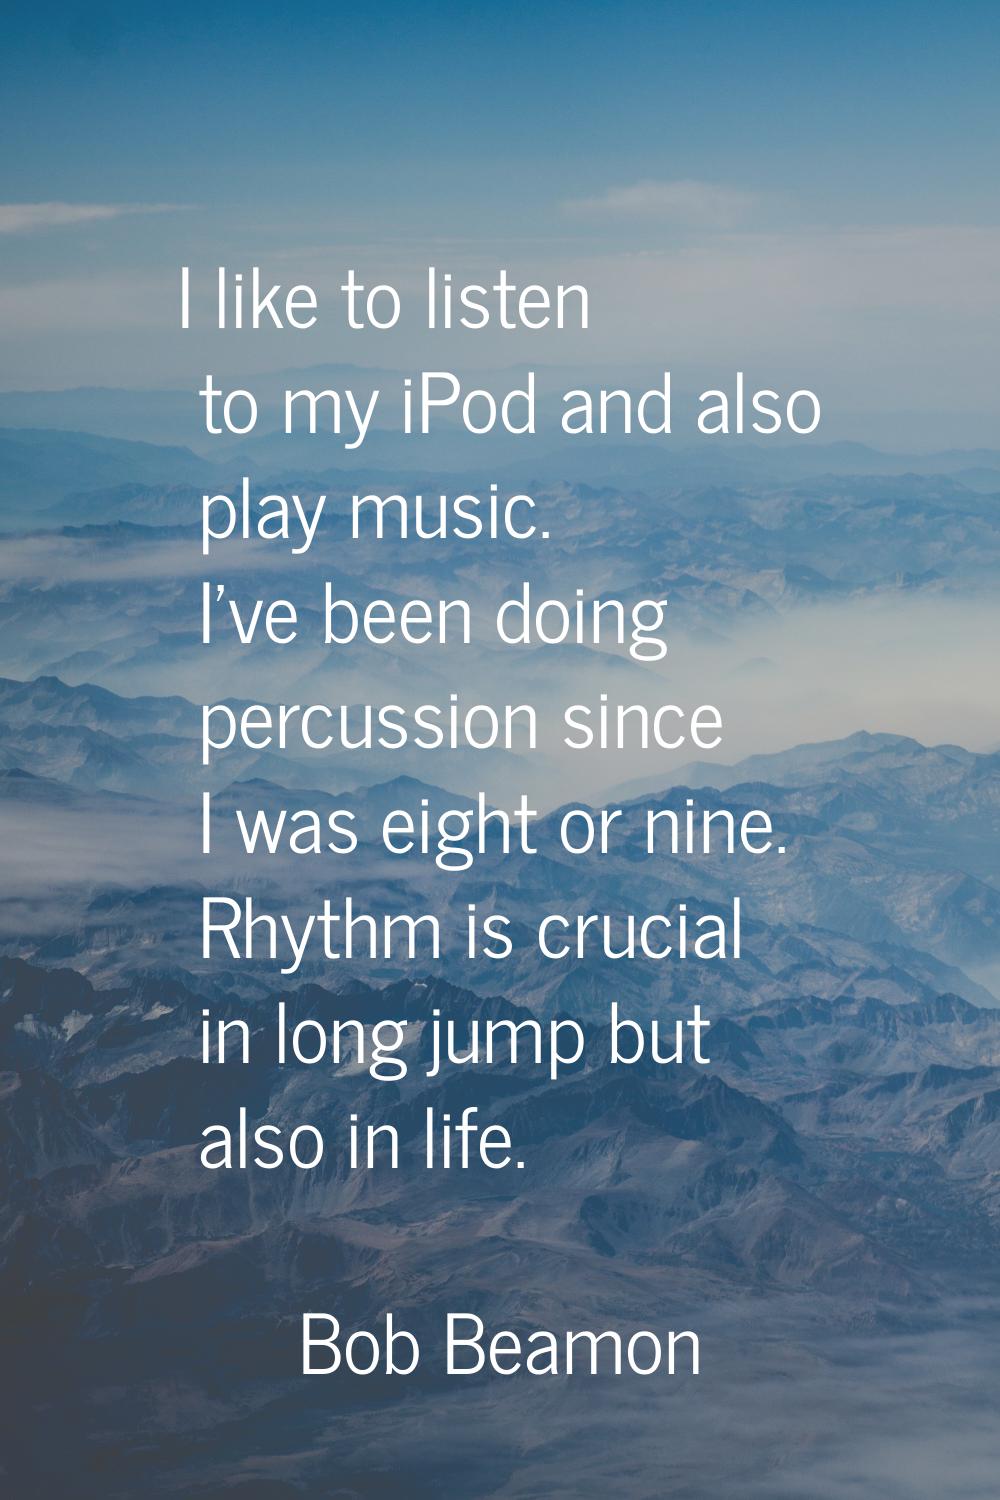 I like to listen to my iPod and also play music. I've been doing percussion since I was eight or ni